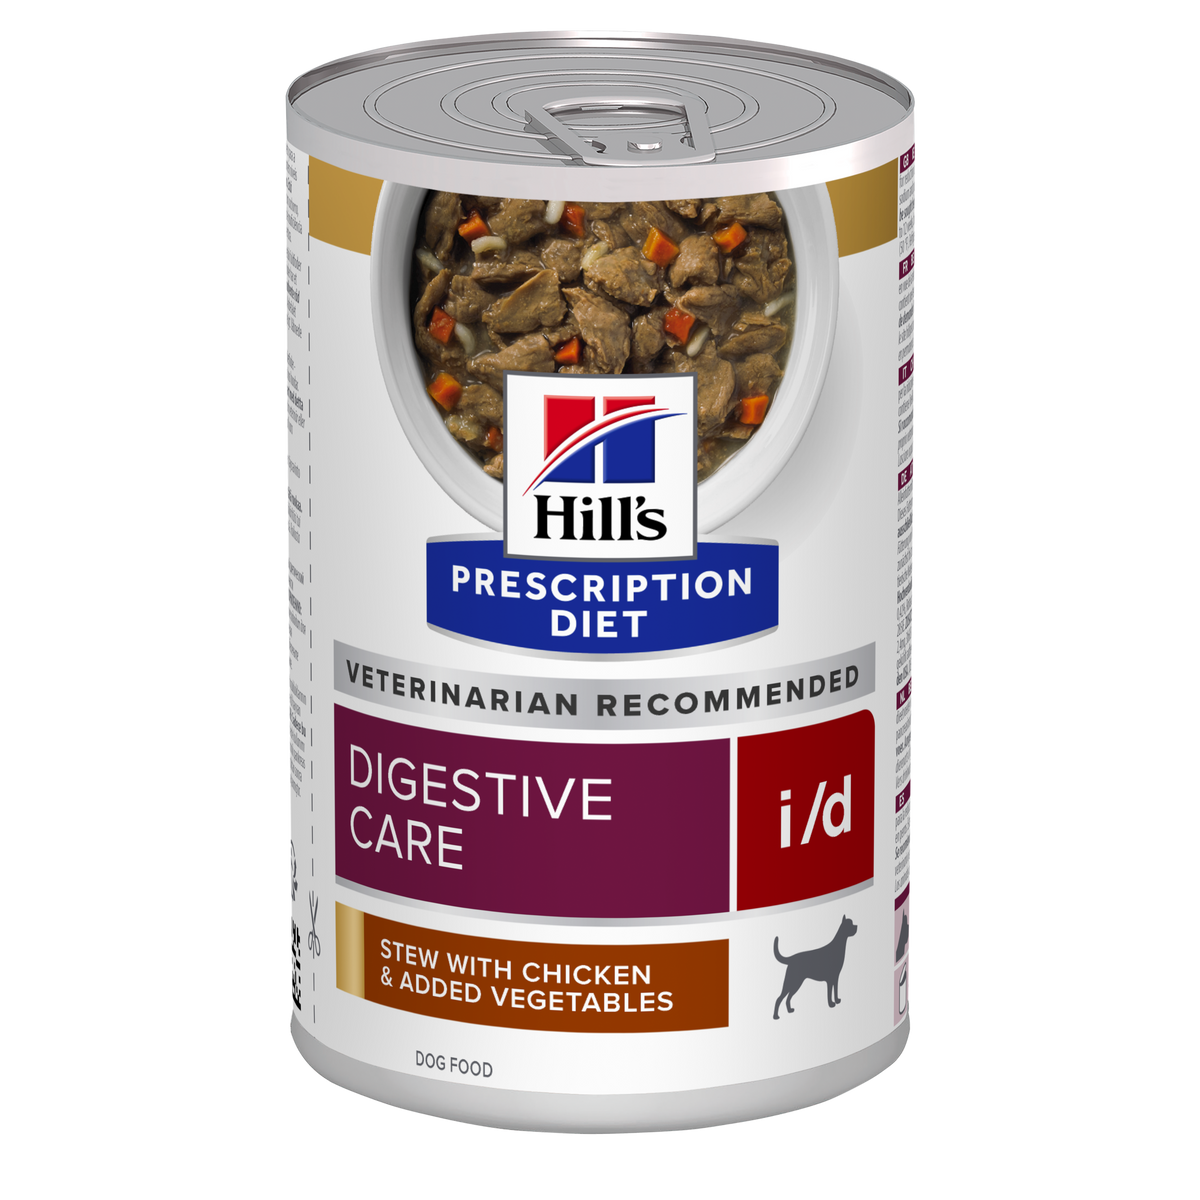 Hill's i/d Digestive Care ActivBiome+ muhennos koiralle 354 g MAISTELU —  